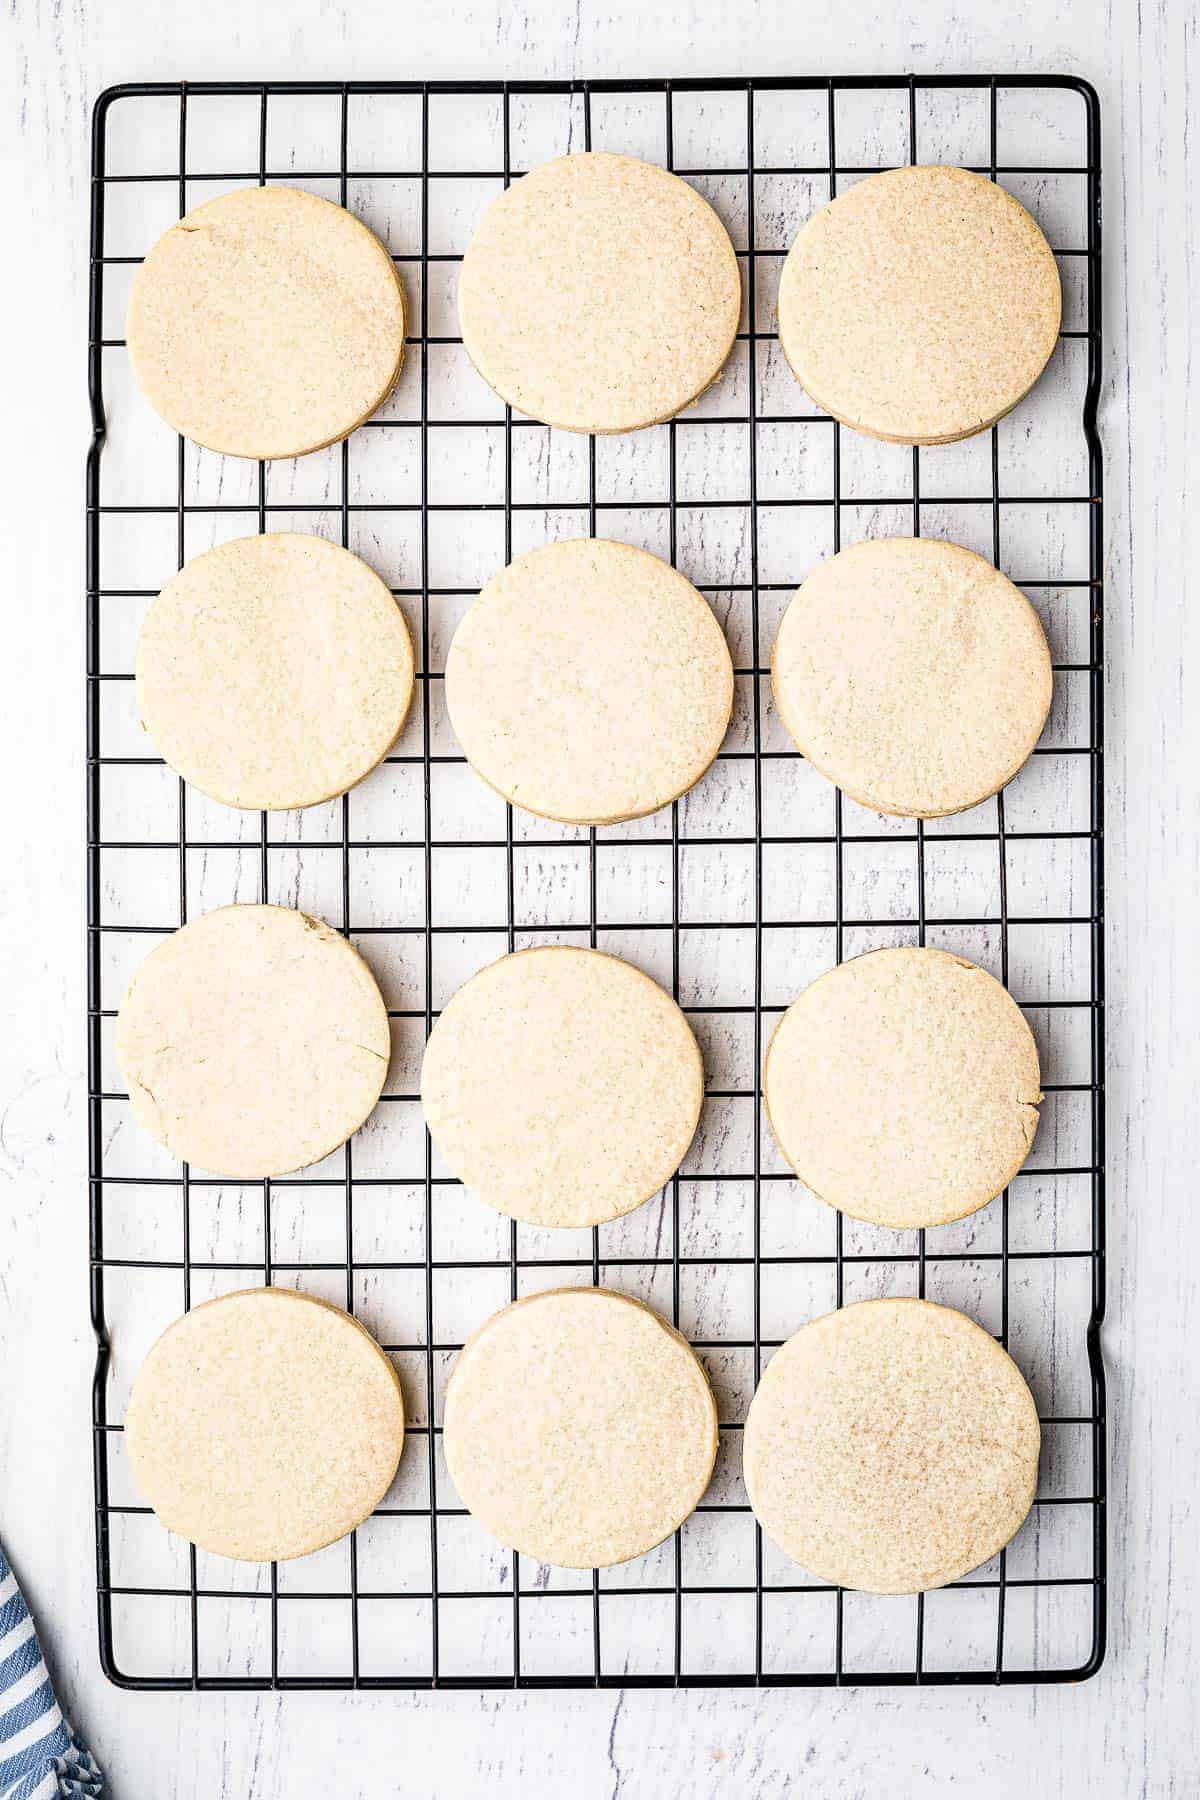 Round sugar cookies cooling on wire rack